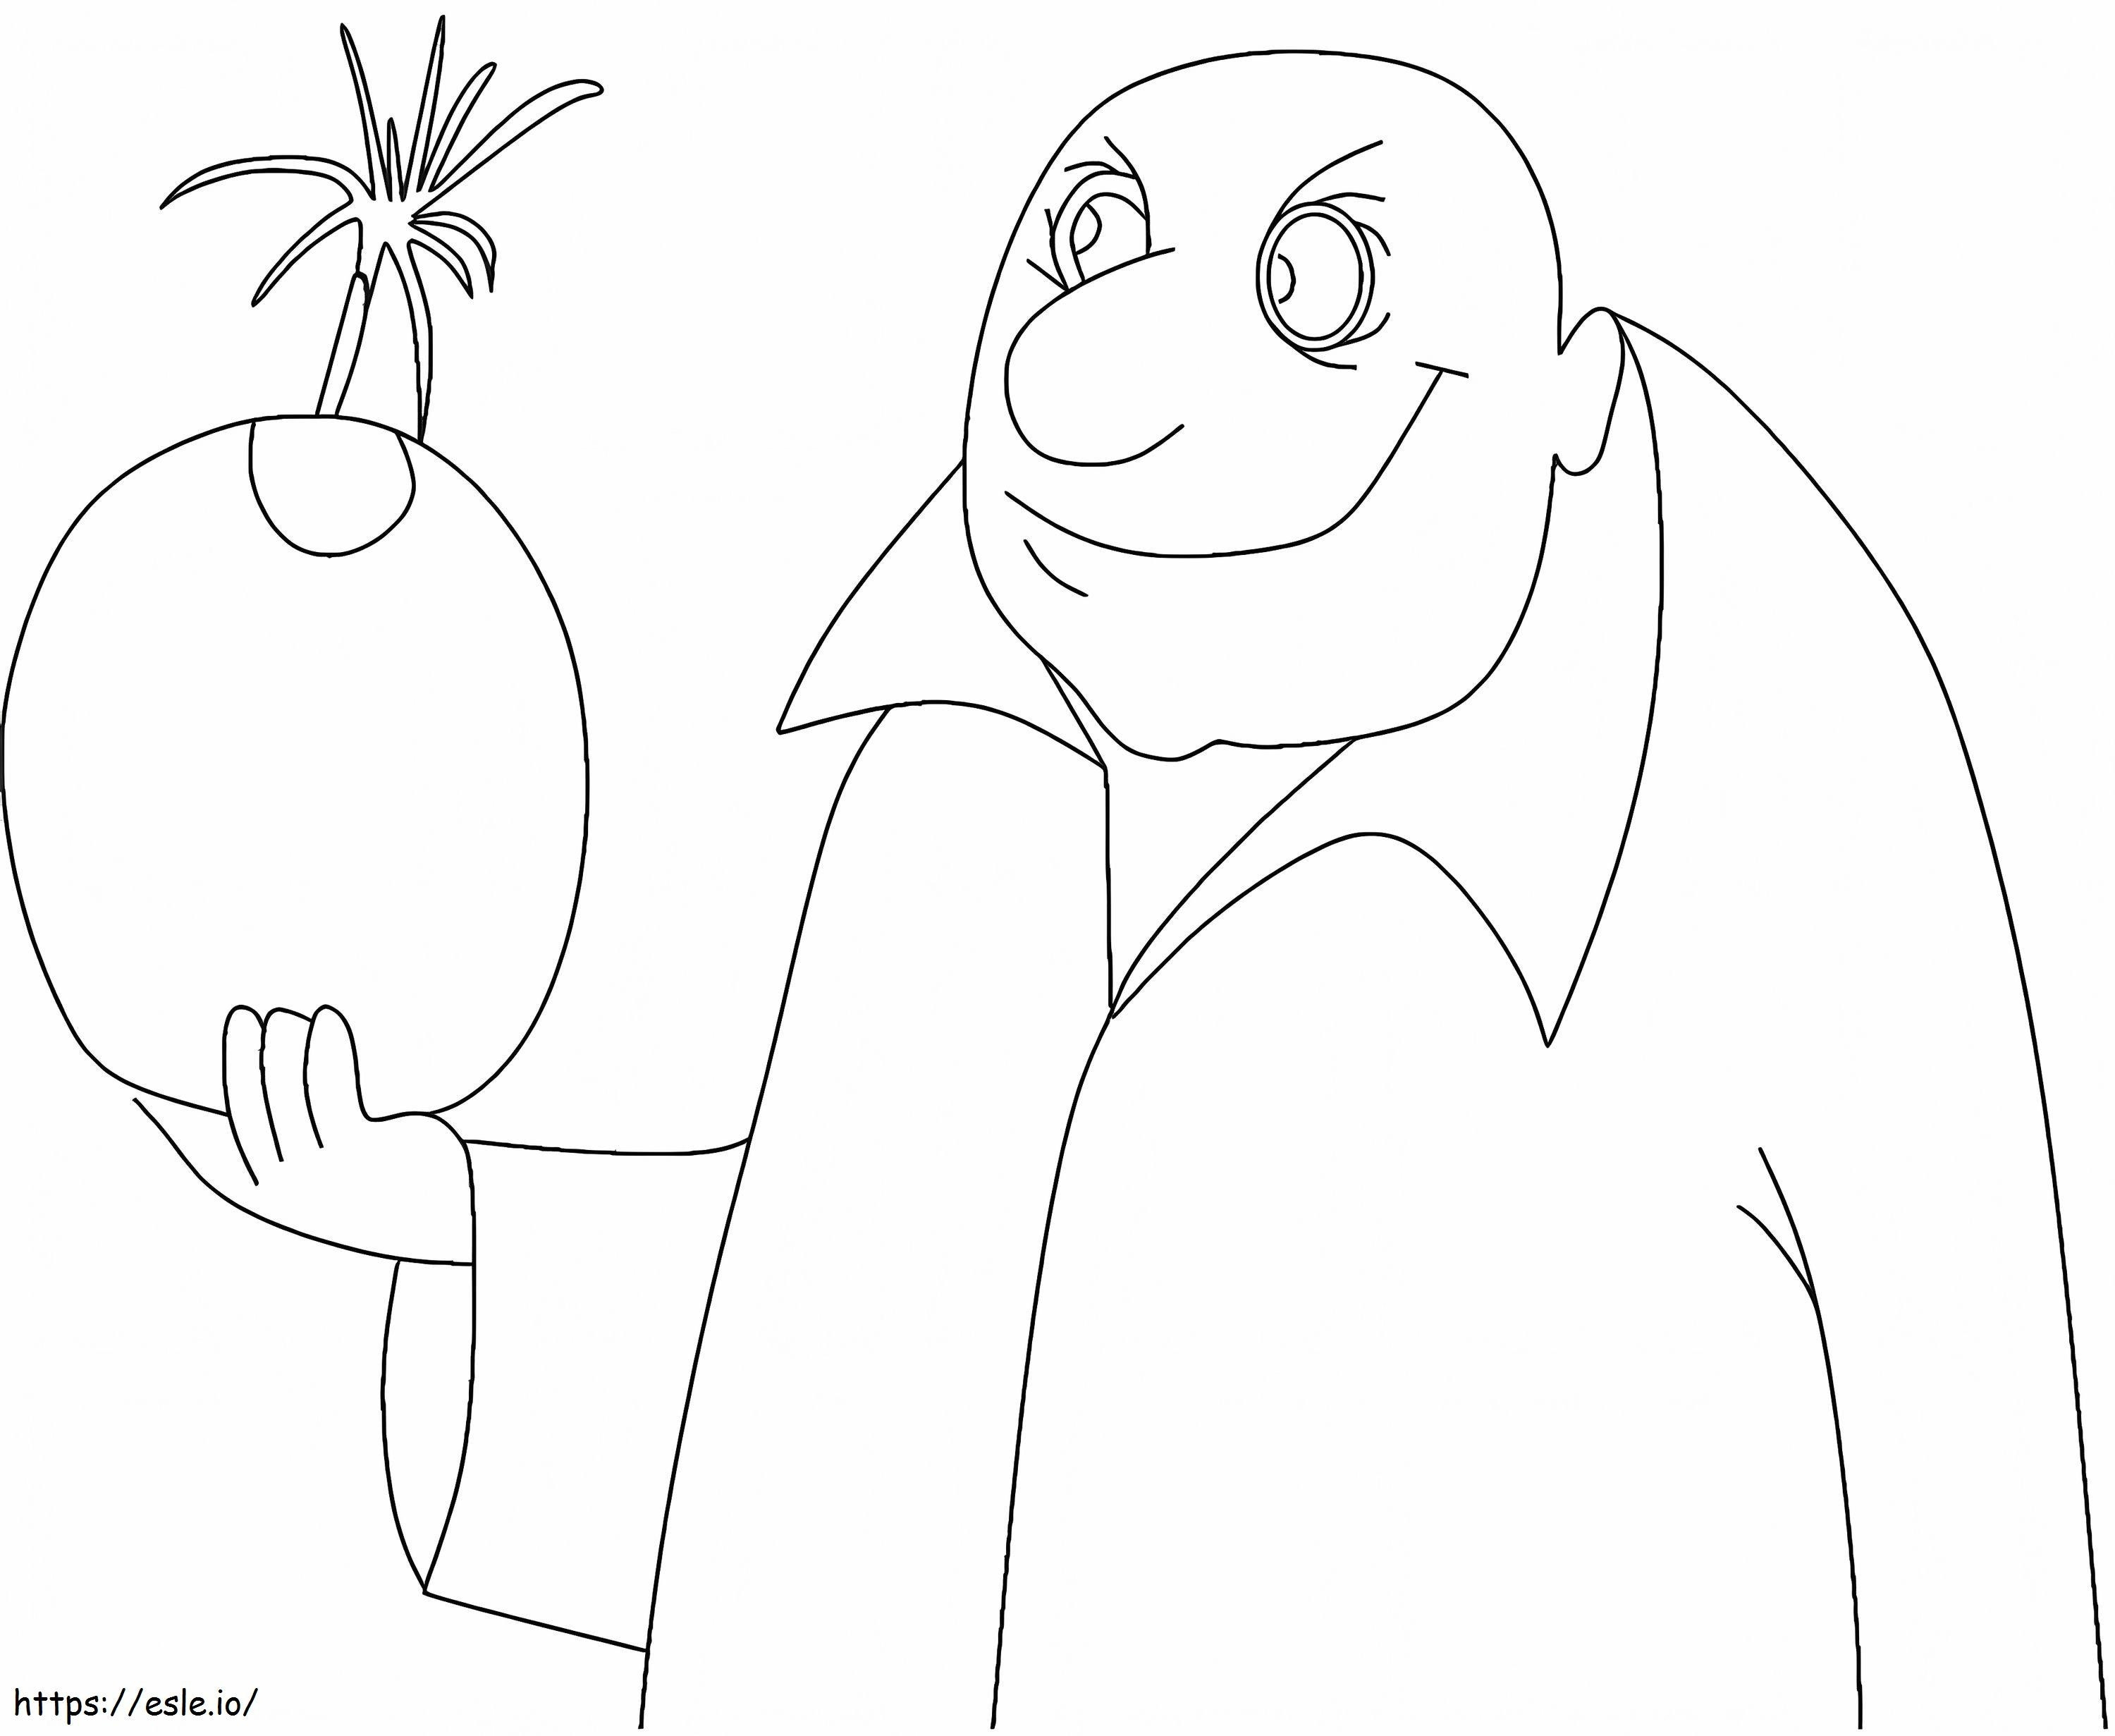 Uncle Fester coloring page